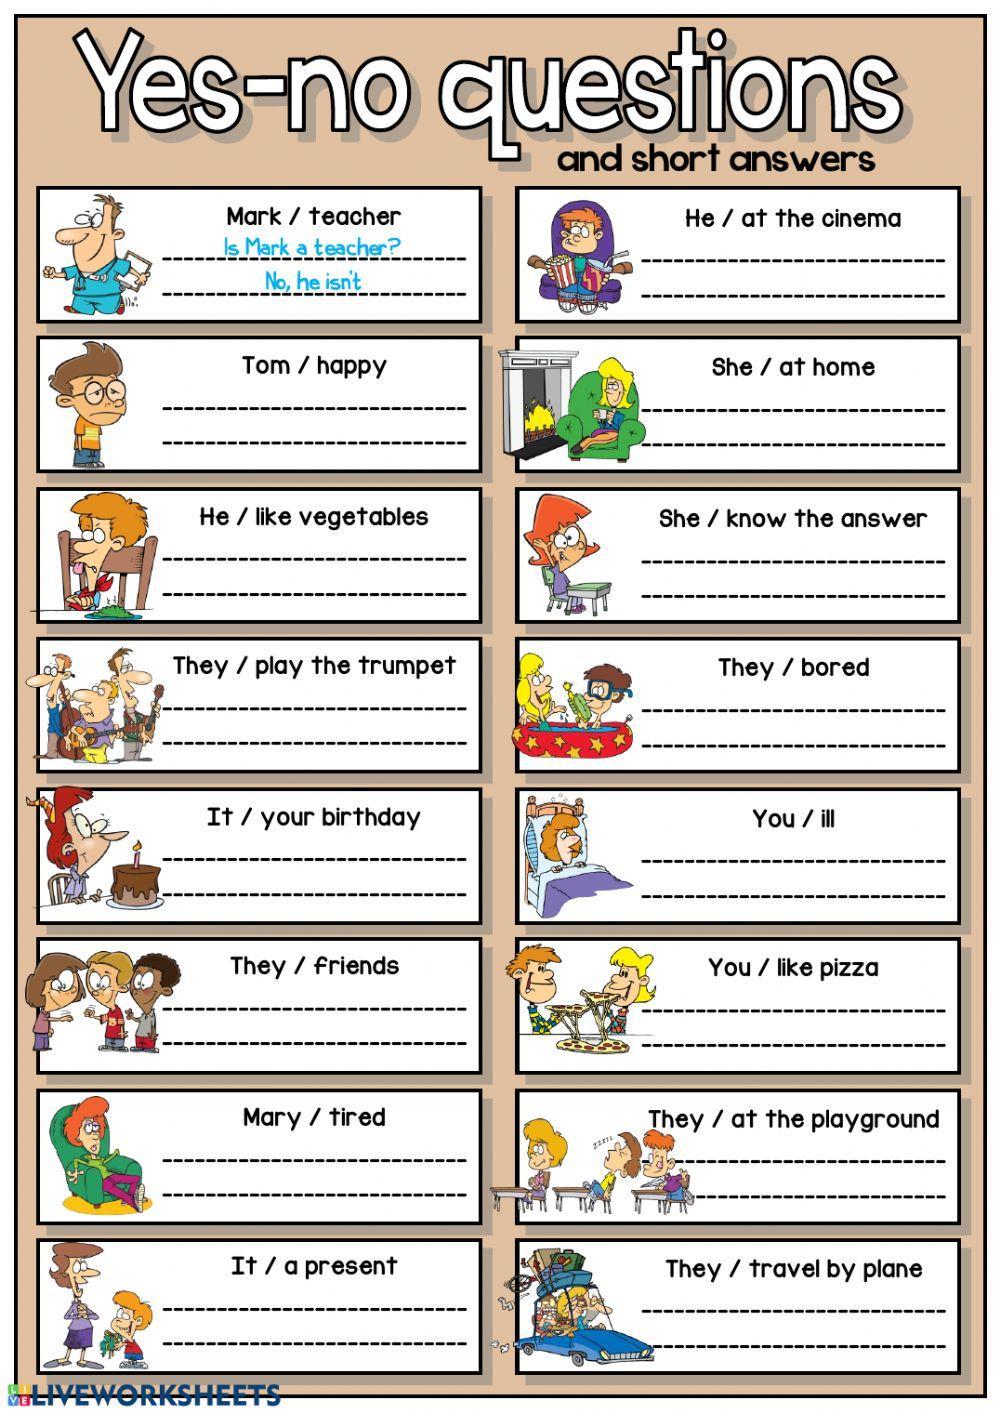 Wordwall question words for kids. Вопросы Worksheets. To be вопросы Worksheets. Вопросы с is Worksheets. To be вопросы Worksheets for Kids.